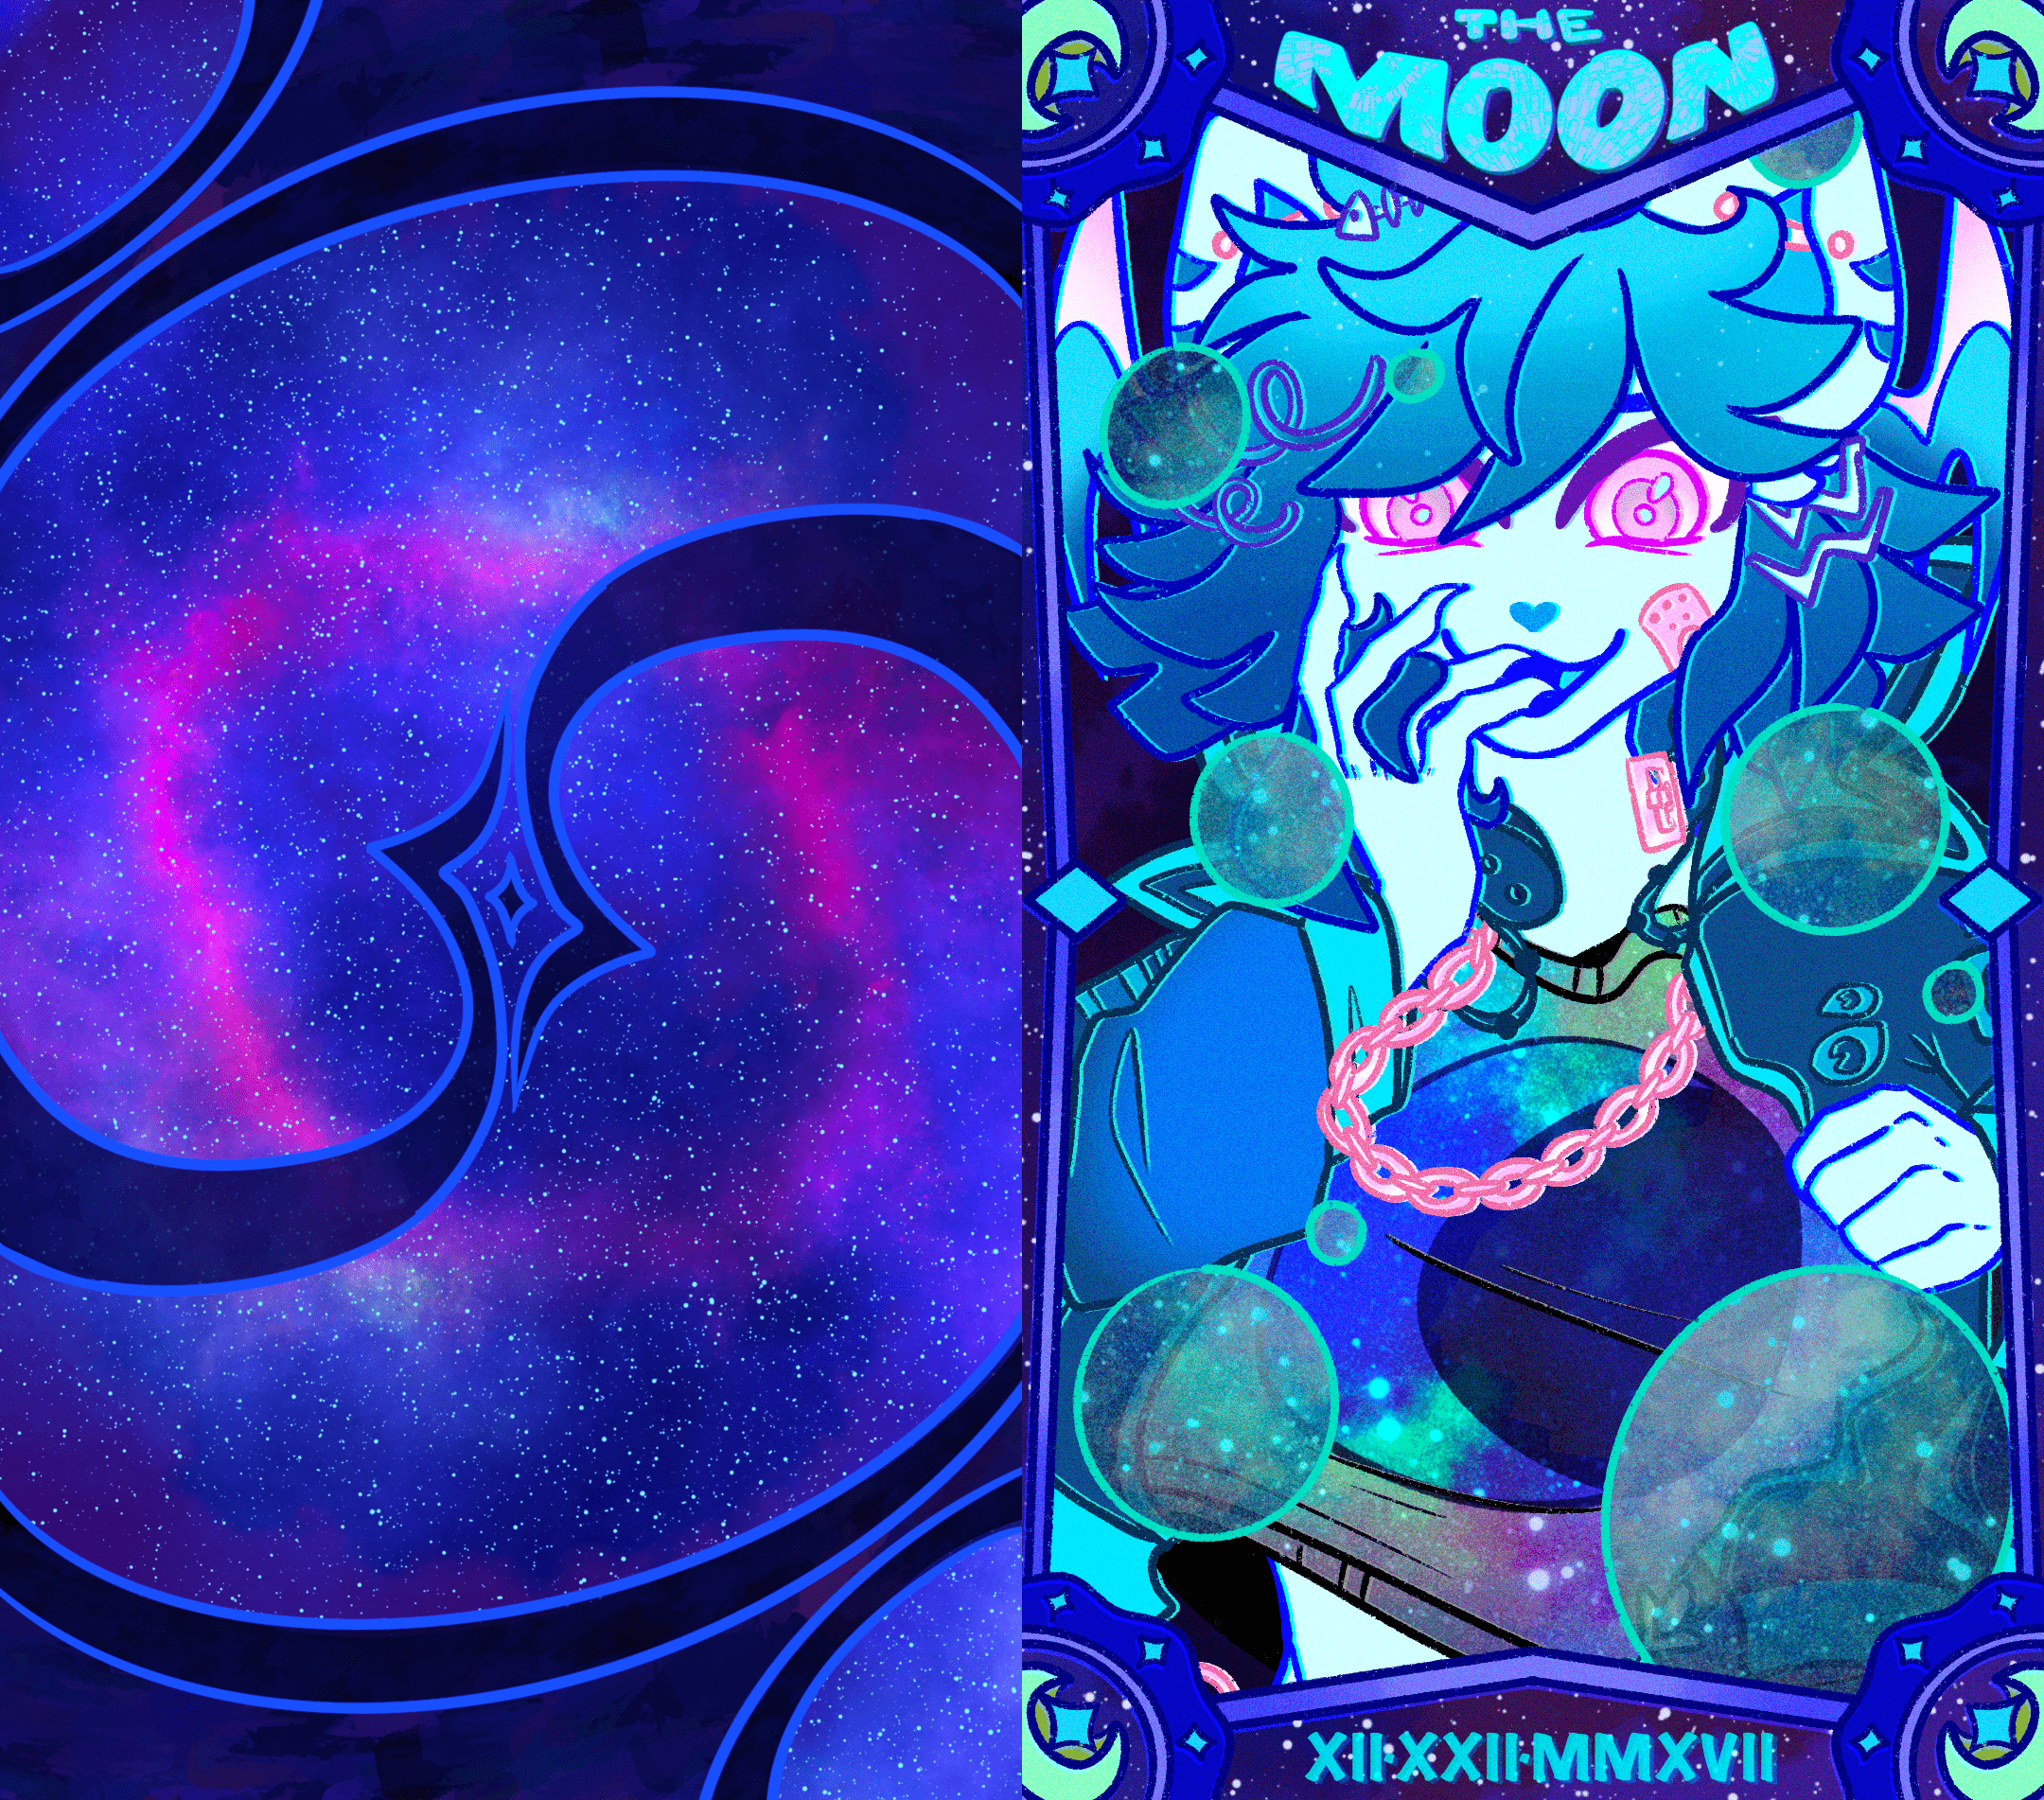 The Moon tarot card drawn by Litchikitti of Cyanide's fursona, Blue. They are blue cat anthro with some fish traits. Their eyes are a striking pink, as are a chain necklace they wear, the metal of their unclipped collar, the bandaid on the lower left of their face, and their bar ear piercings. They are wearing a moon shirt and a jacket, both of which are lifted upward by unseen wind. Moon bubbles float in front of them. They are holding their right hand up to their face, and their expression is whimsical and happy. There is a date at the bottom in roman numerals, 12/23/2017. On the left side there is a dark spiral over a blue galaxy that represents the back of the tarot card.